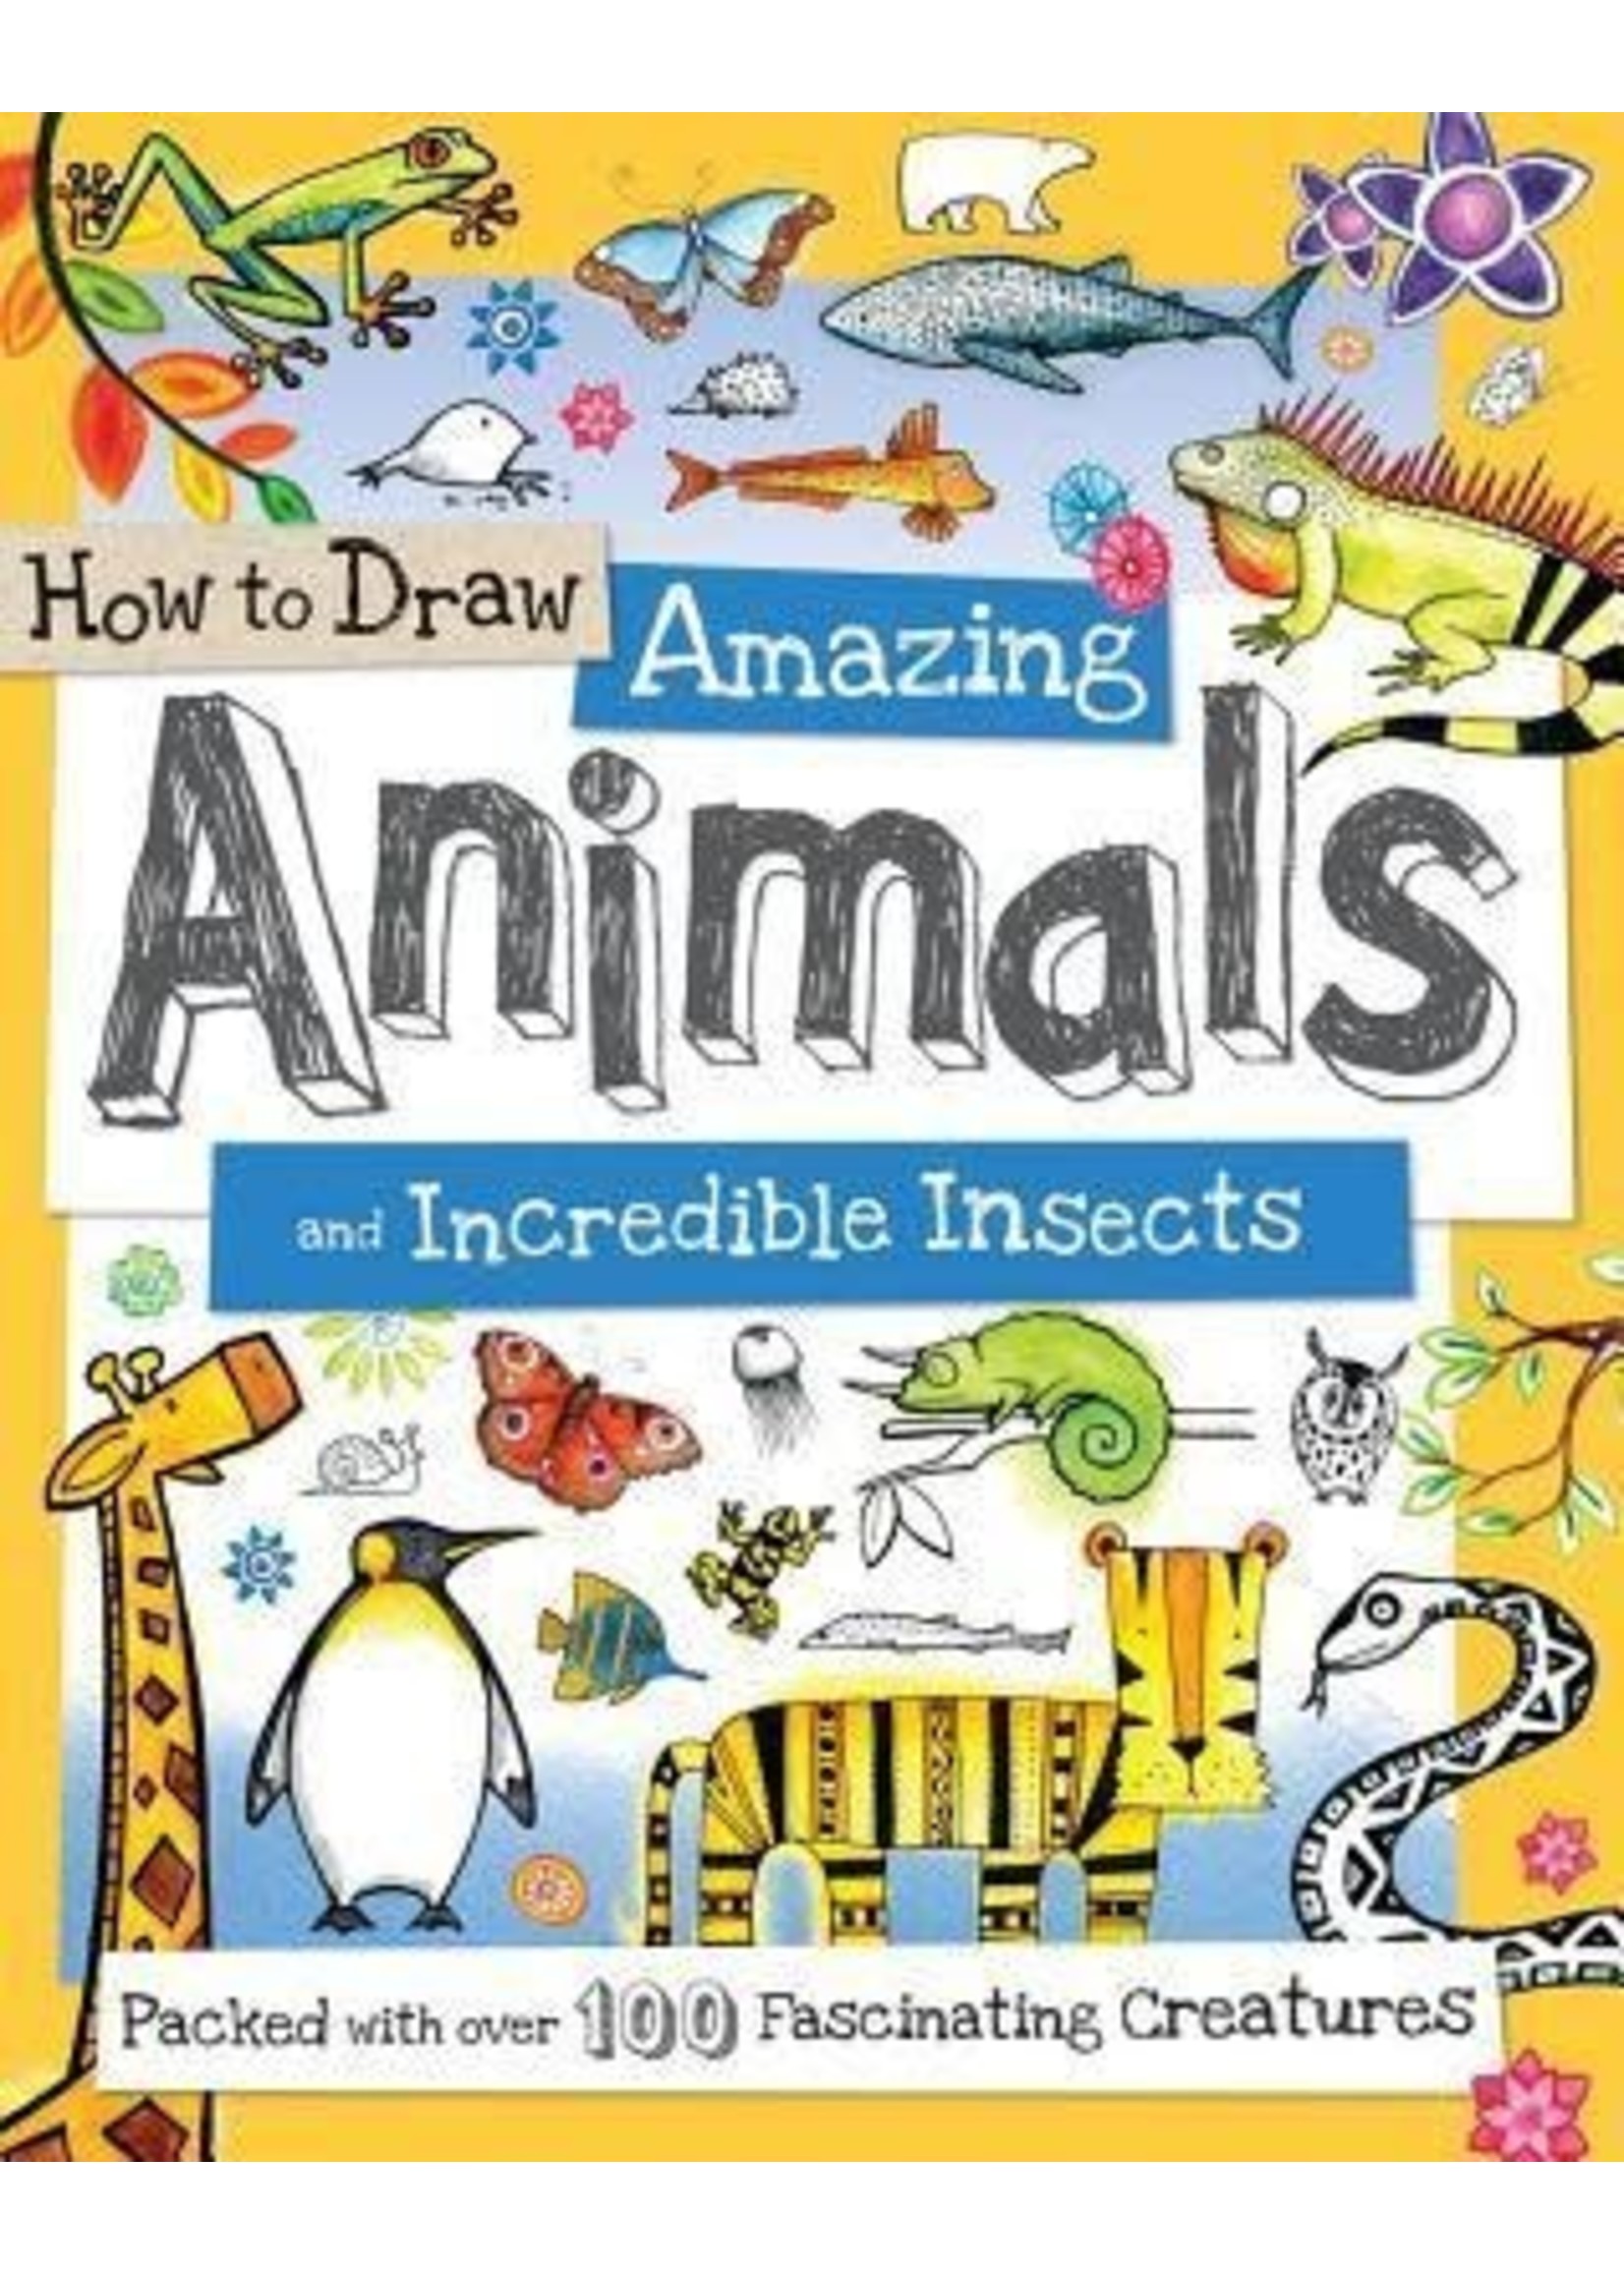 How to Draw Amazing Animals and Incredible Insects: Packed with Over 100 Fascinating Animals by Fiona Gowen